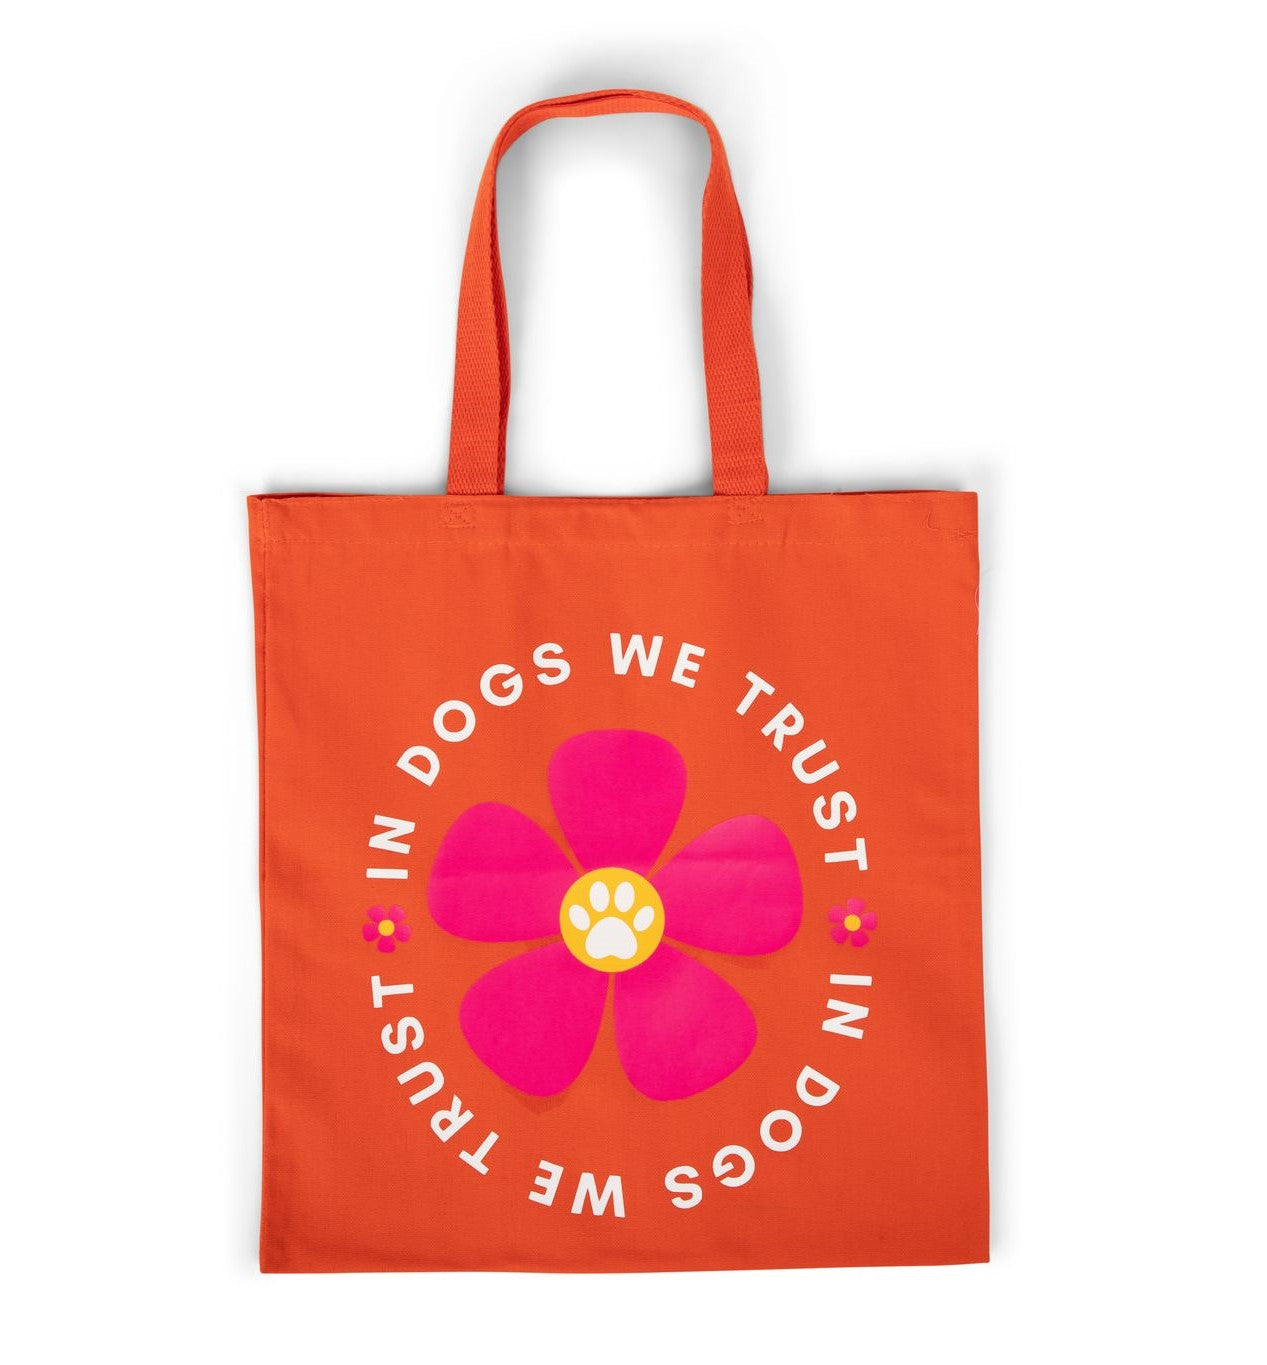 IN DOGS WE TRUST TOTE